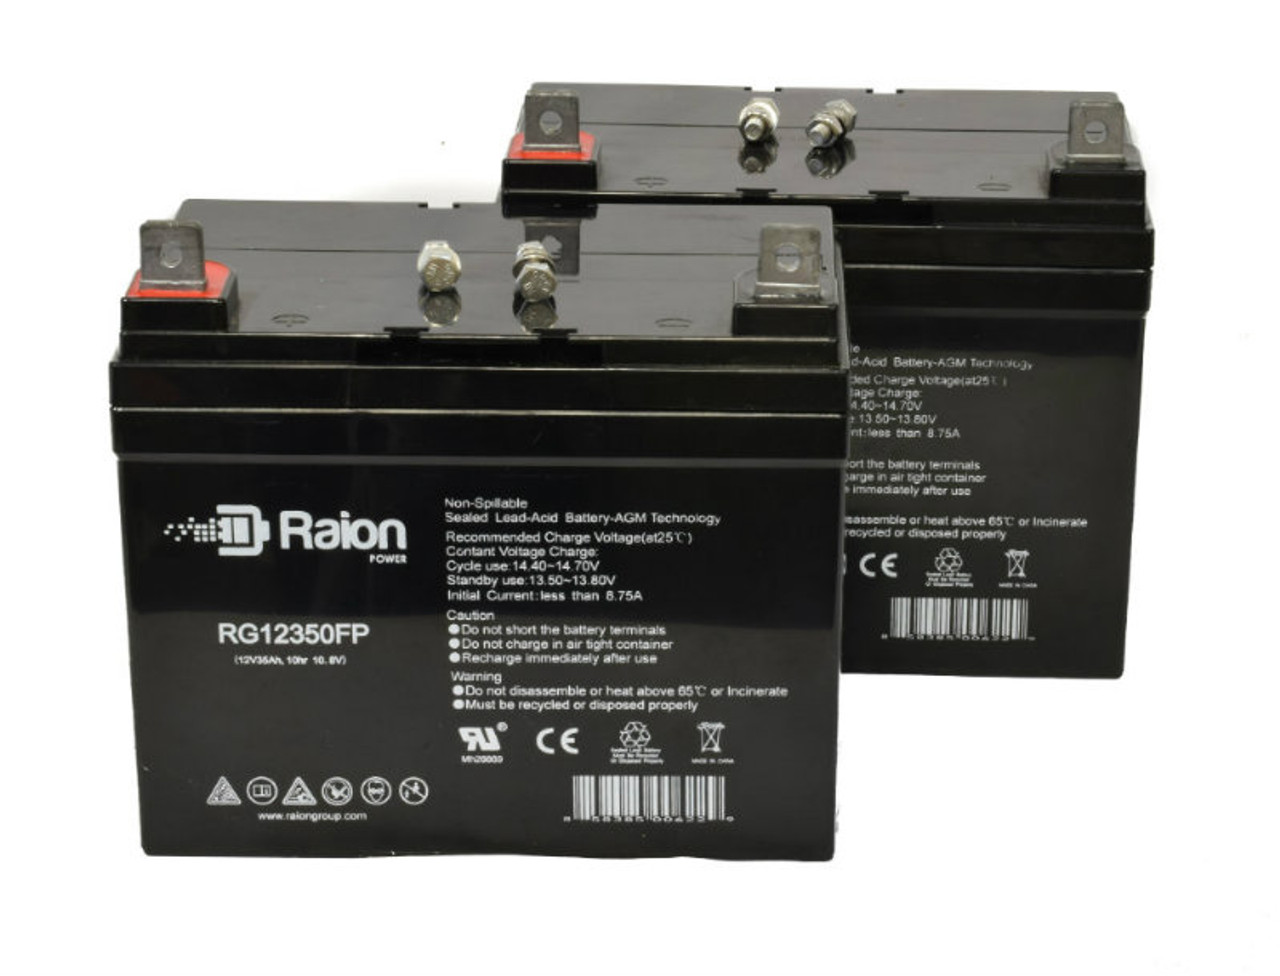 Raion Power Replacement 12V 35Ah Lawn Mower Battery for Dixon 5501 - 2 Pack